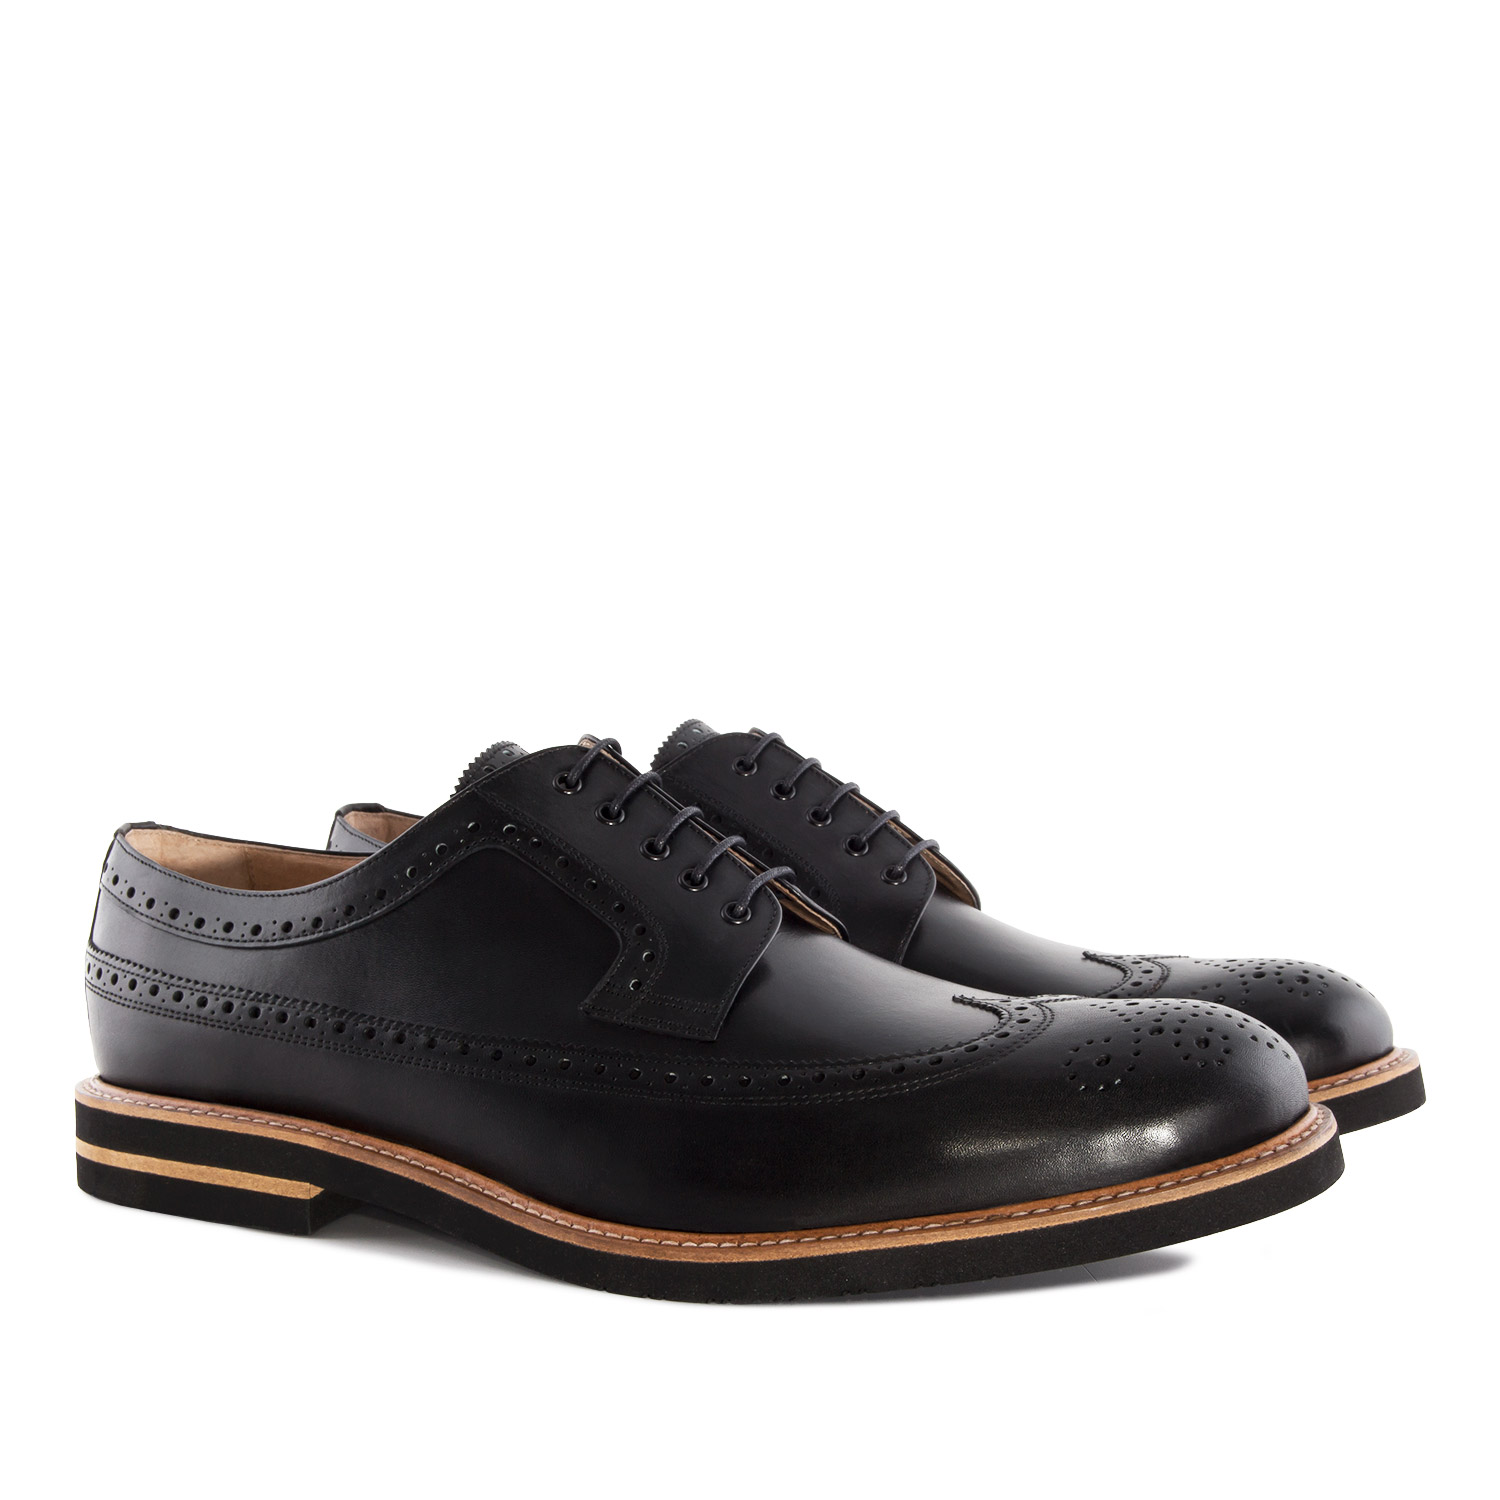 Oxford Shoes in Black Leather 